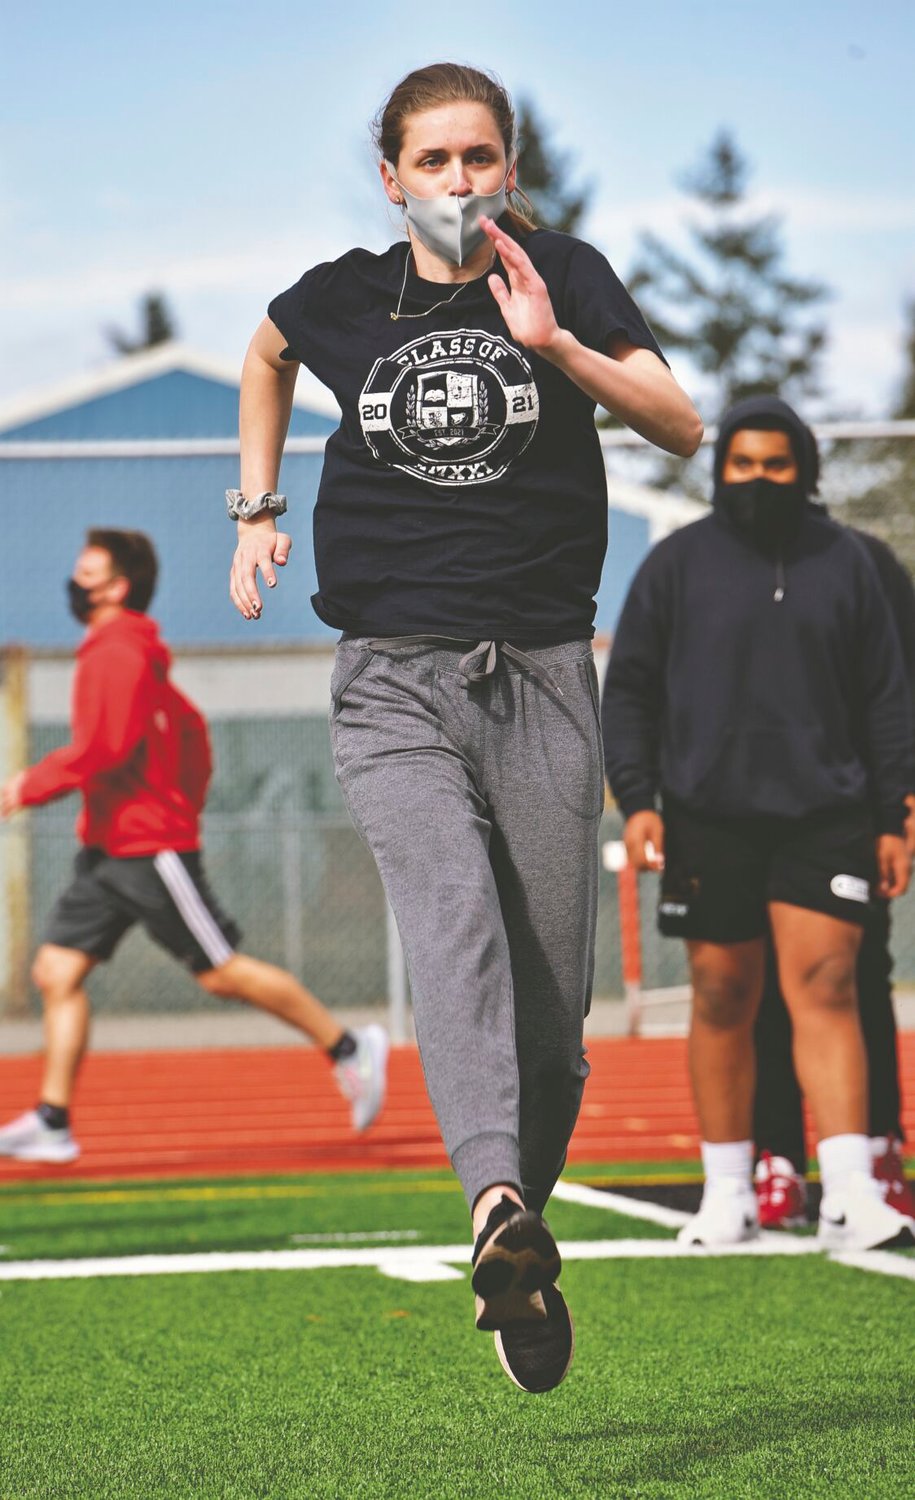 Yelm High School high jumper Abigail Carlson goes through warmups with her track and field teammates on Monday, March 22.